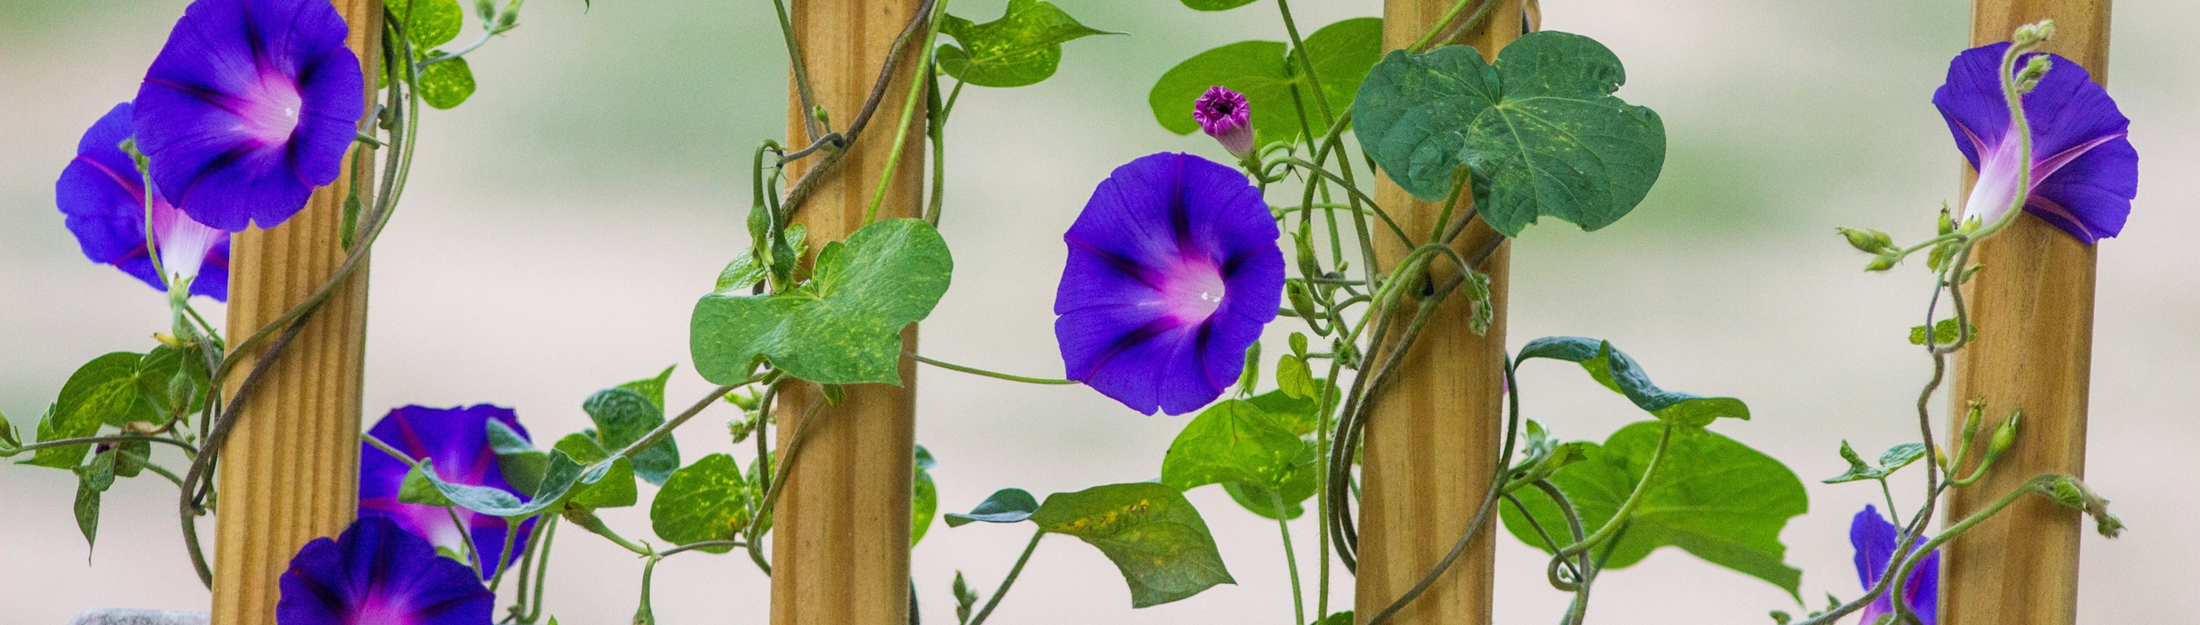  Morning glories take over the decks woodwork. The vines wrap around rail spindles...